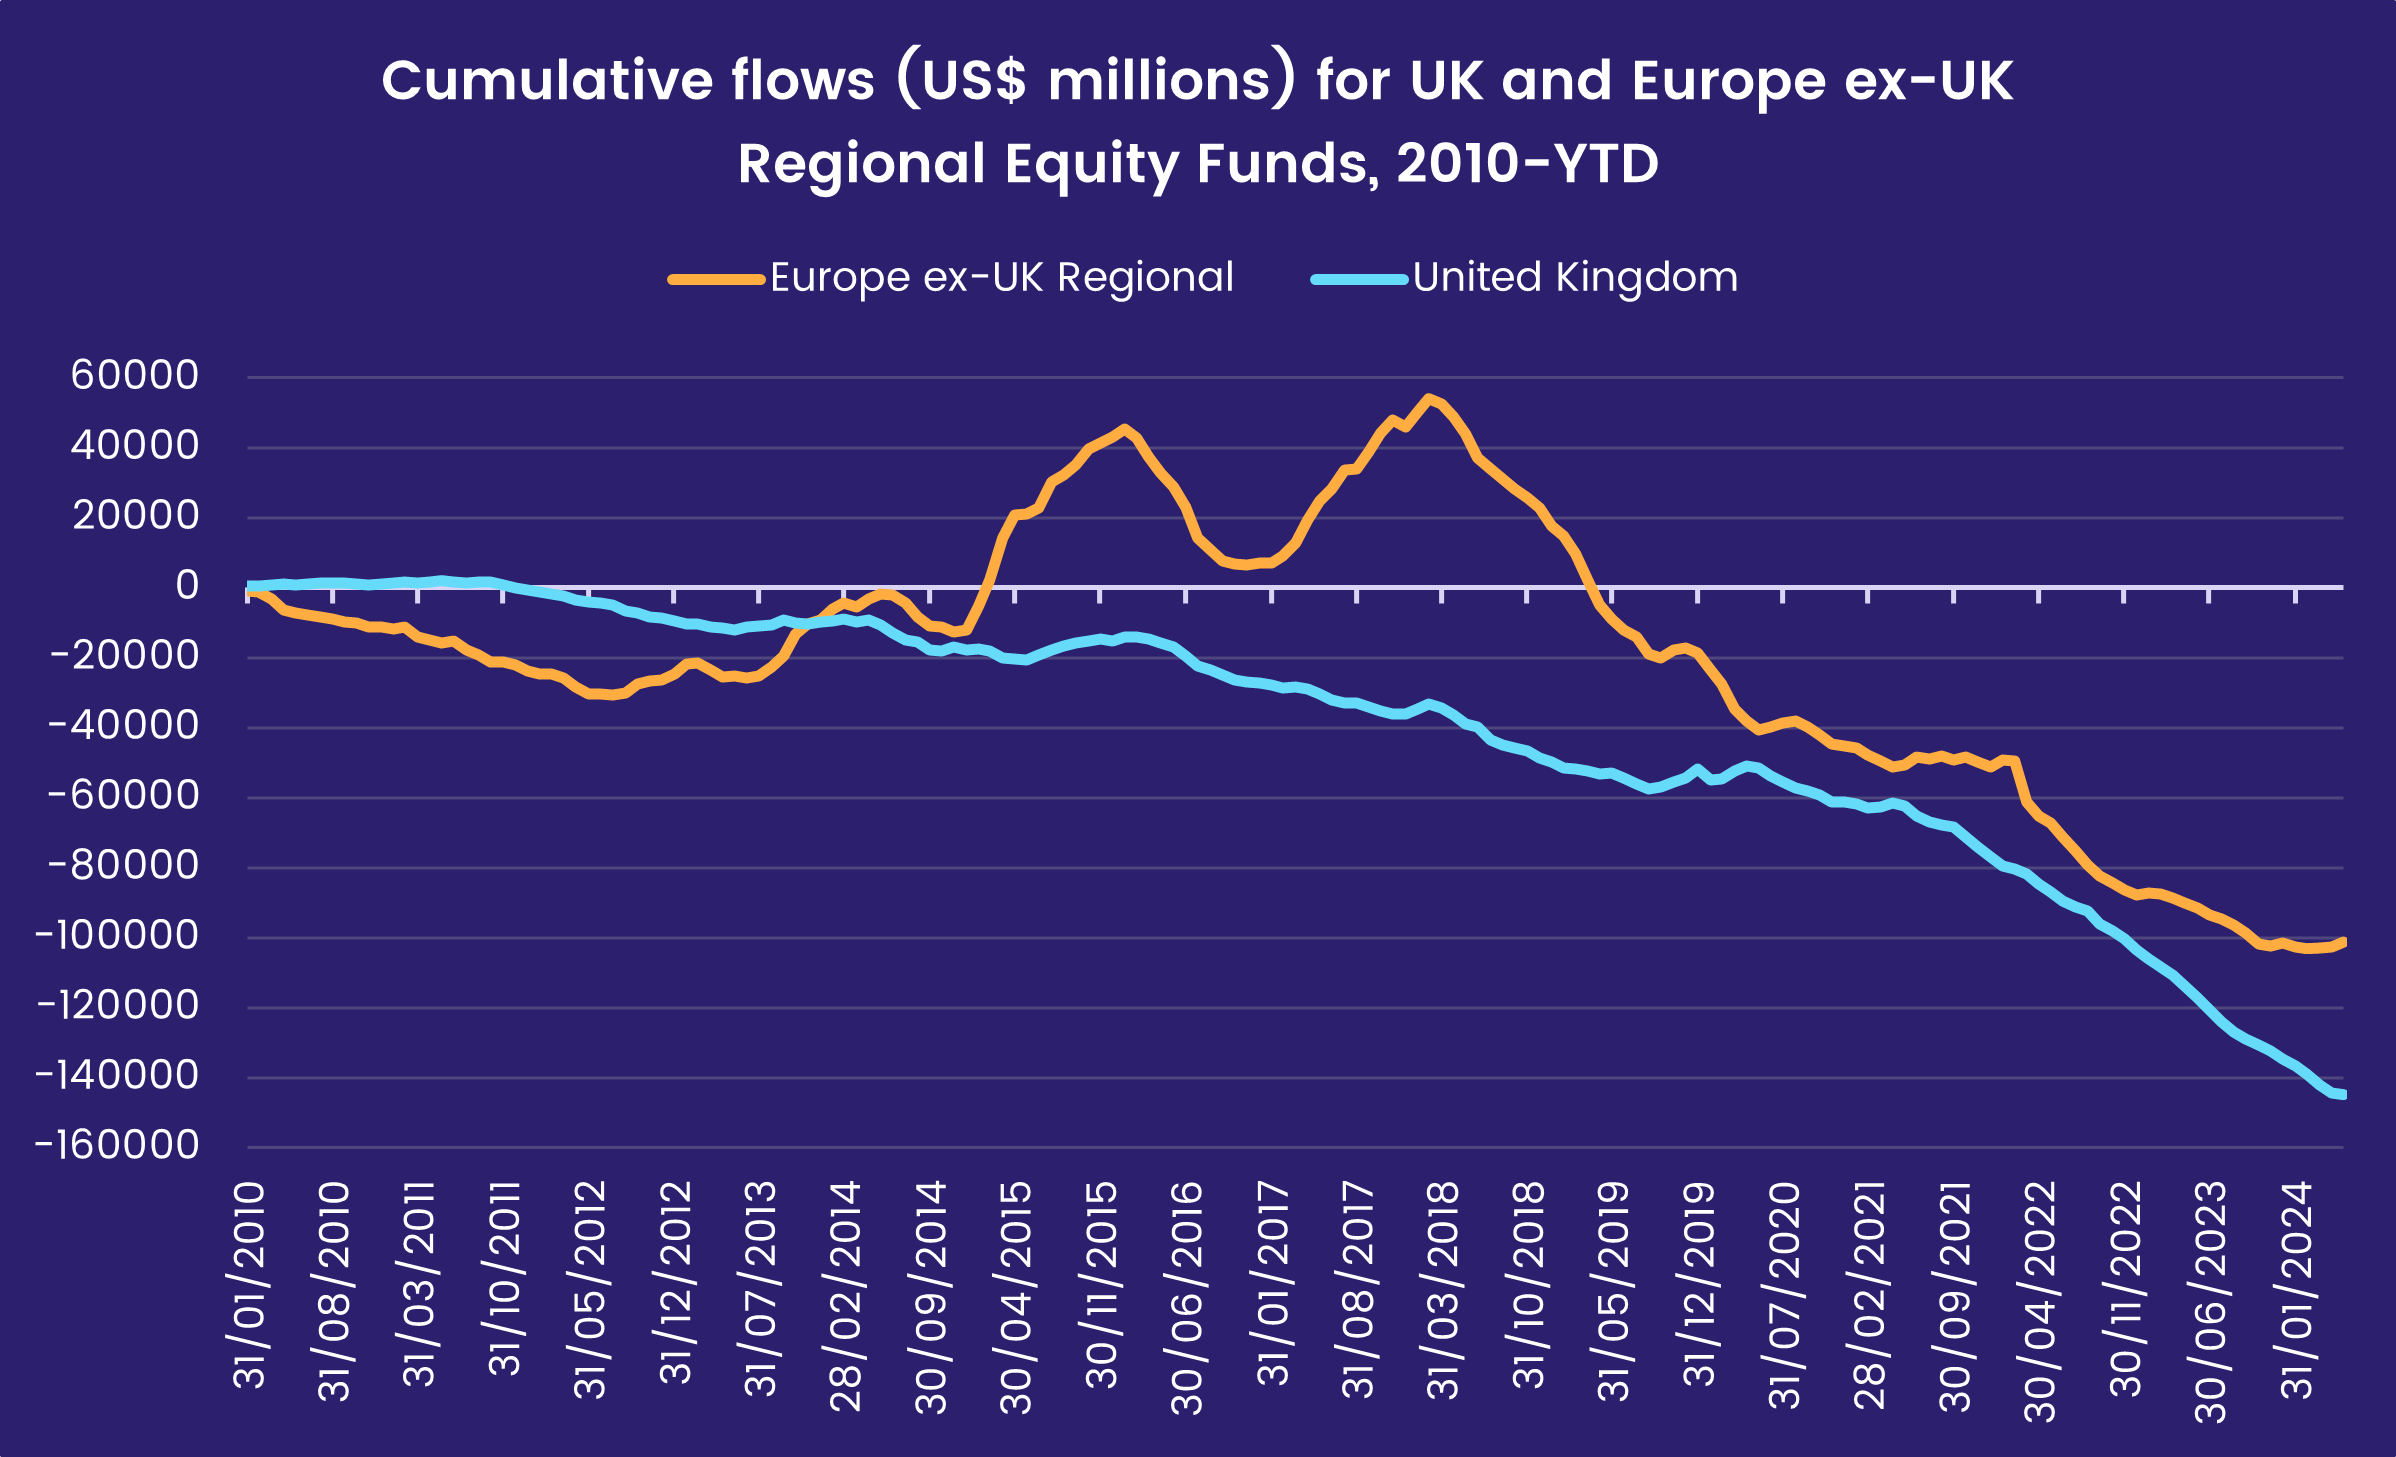 Chart representing 'Cumulative flows (US$ millions) for UK and Europe ex-UK Regional Equity Funds, 2010-YTD'